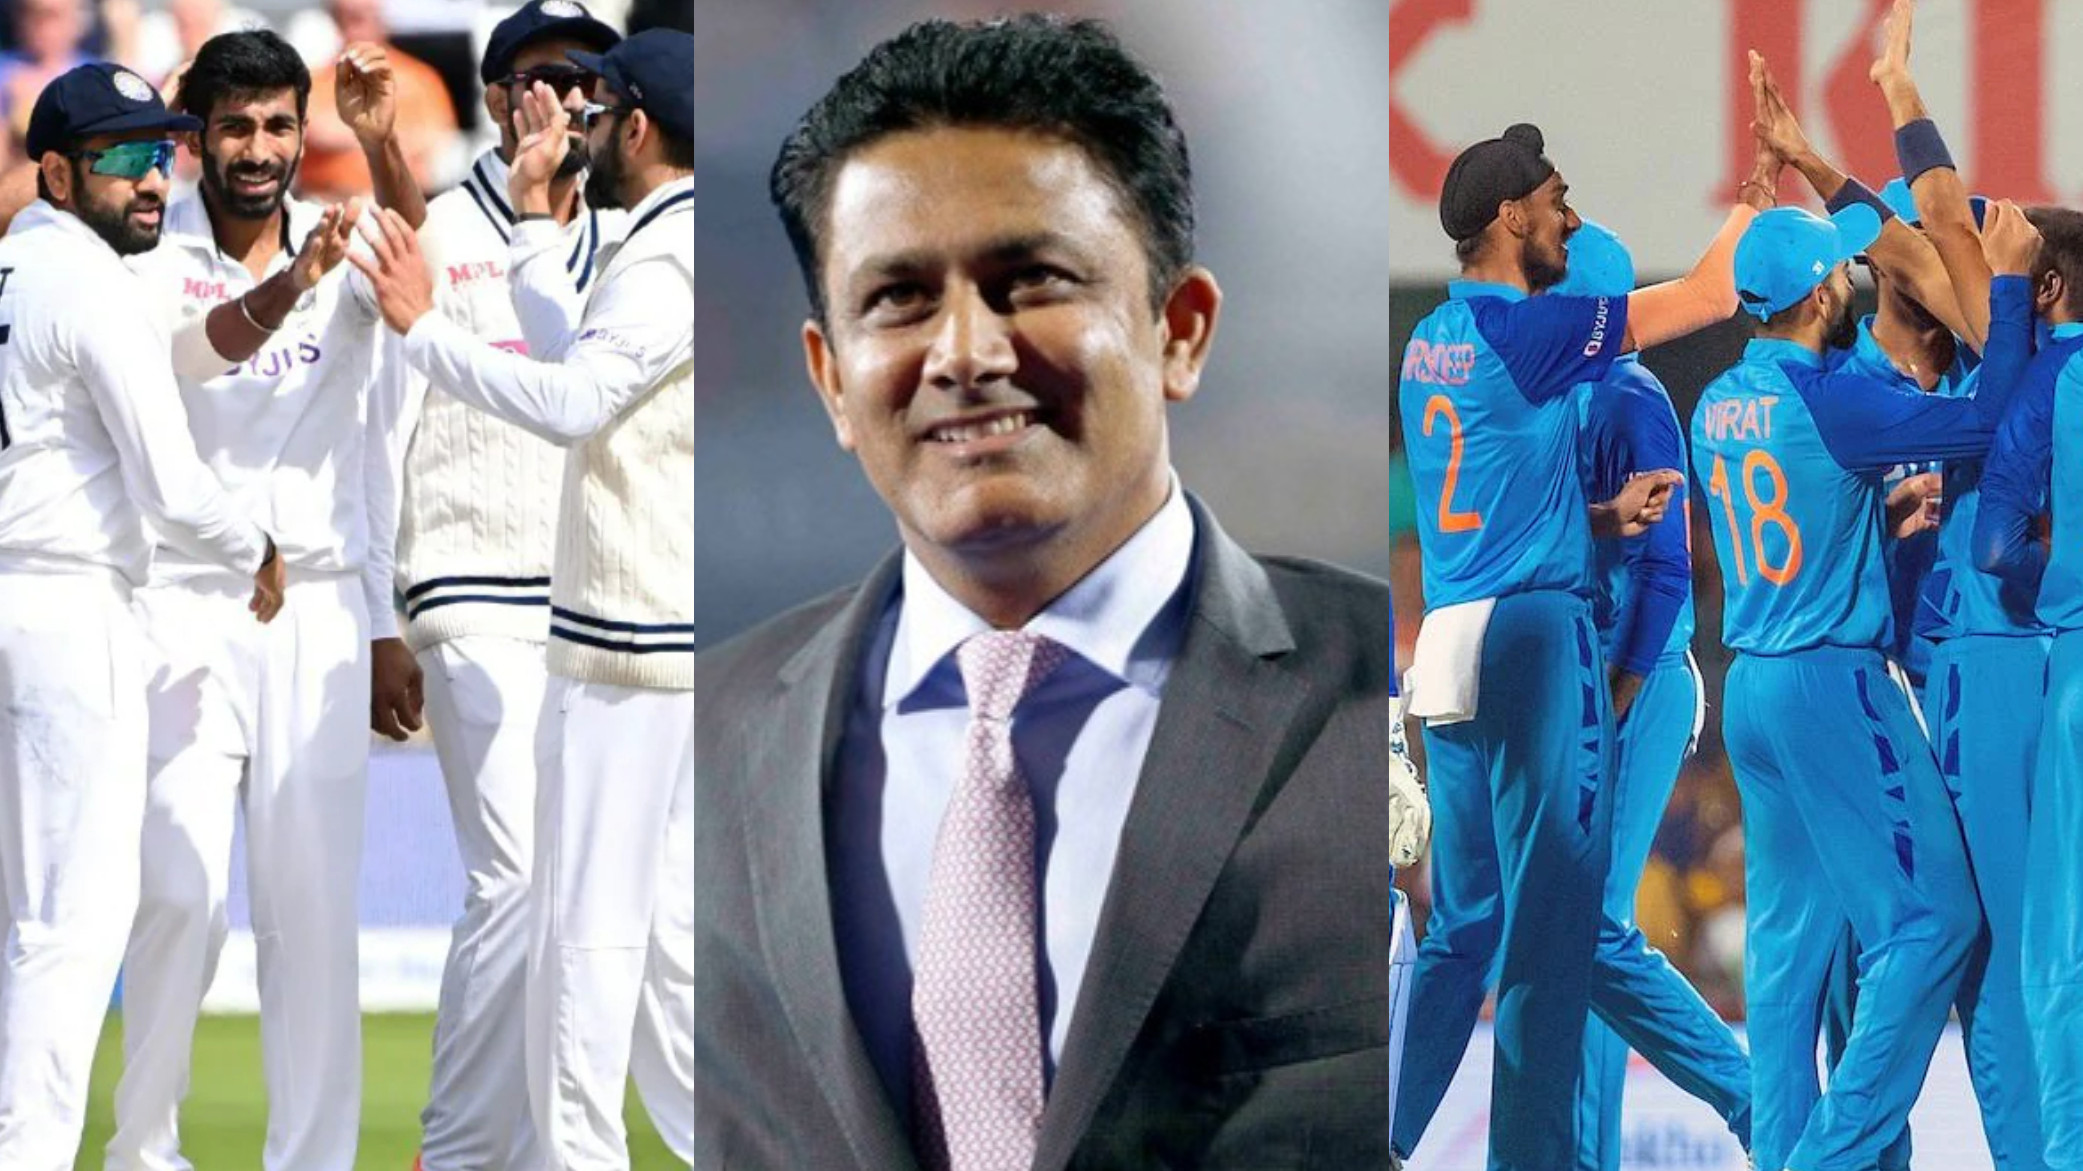 Anil Kumble calls for separate India teams for Tests and limited overs formats in aftermath of T20 World Cup